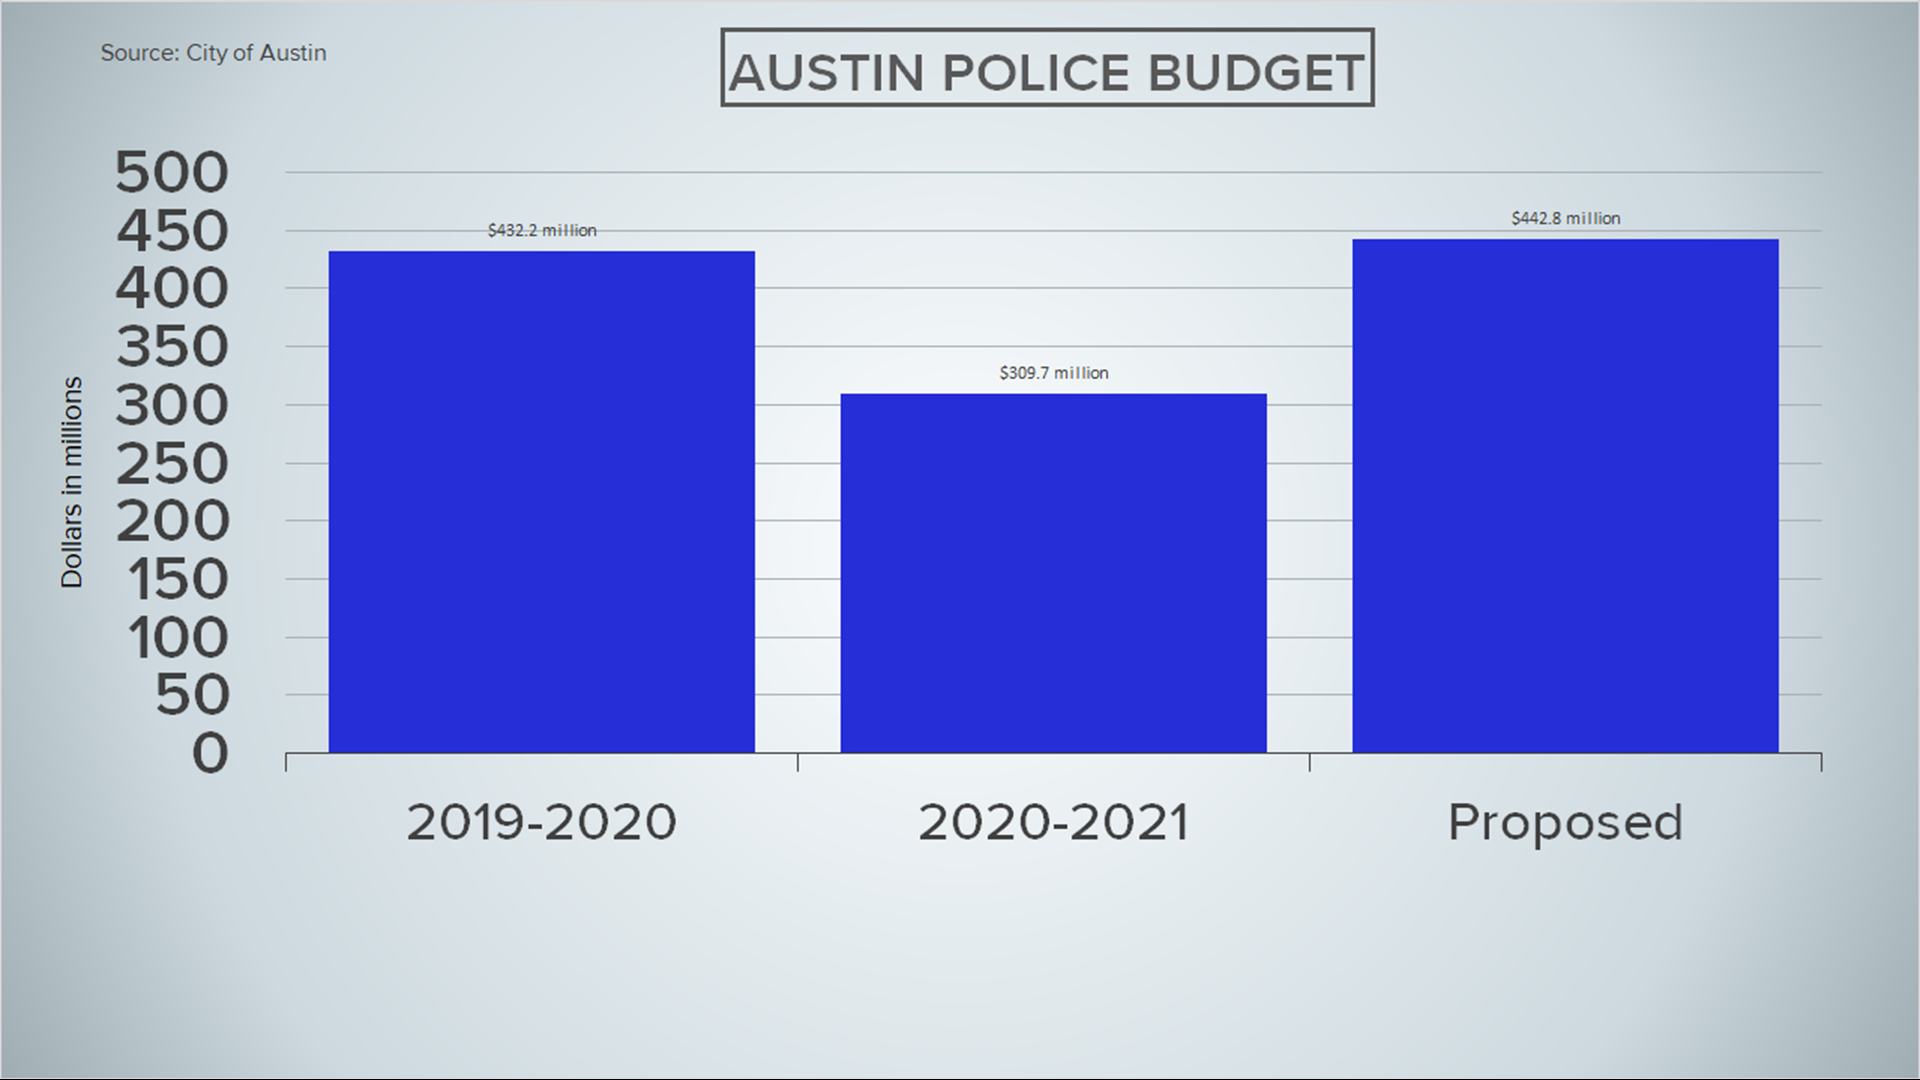 Approved APD budget for fiscal year 202122 over 443 million